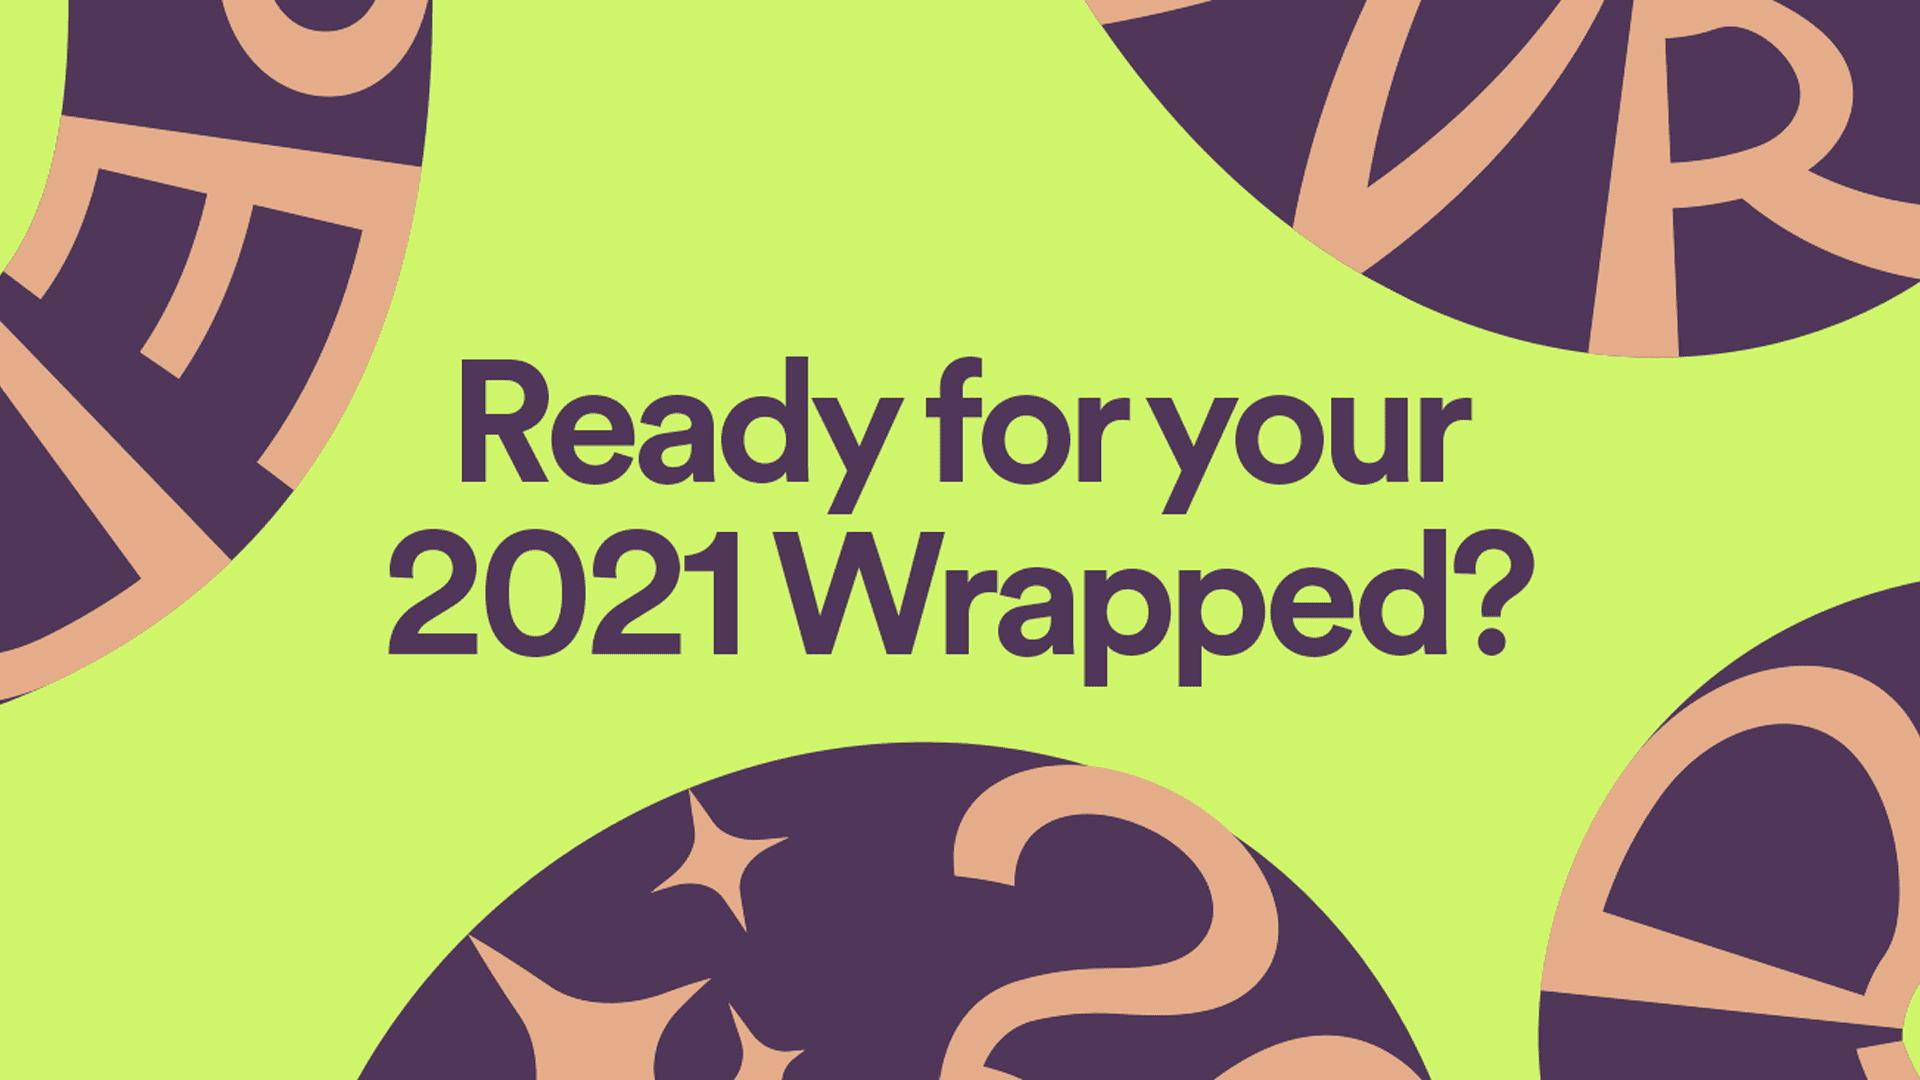 Spotify wrapped 2021: How to Listen to Your Year’s Review